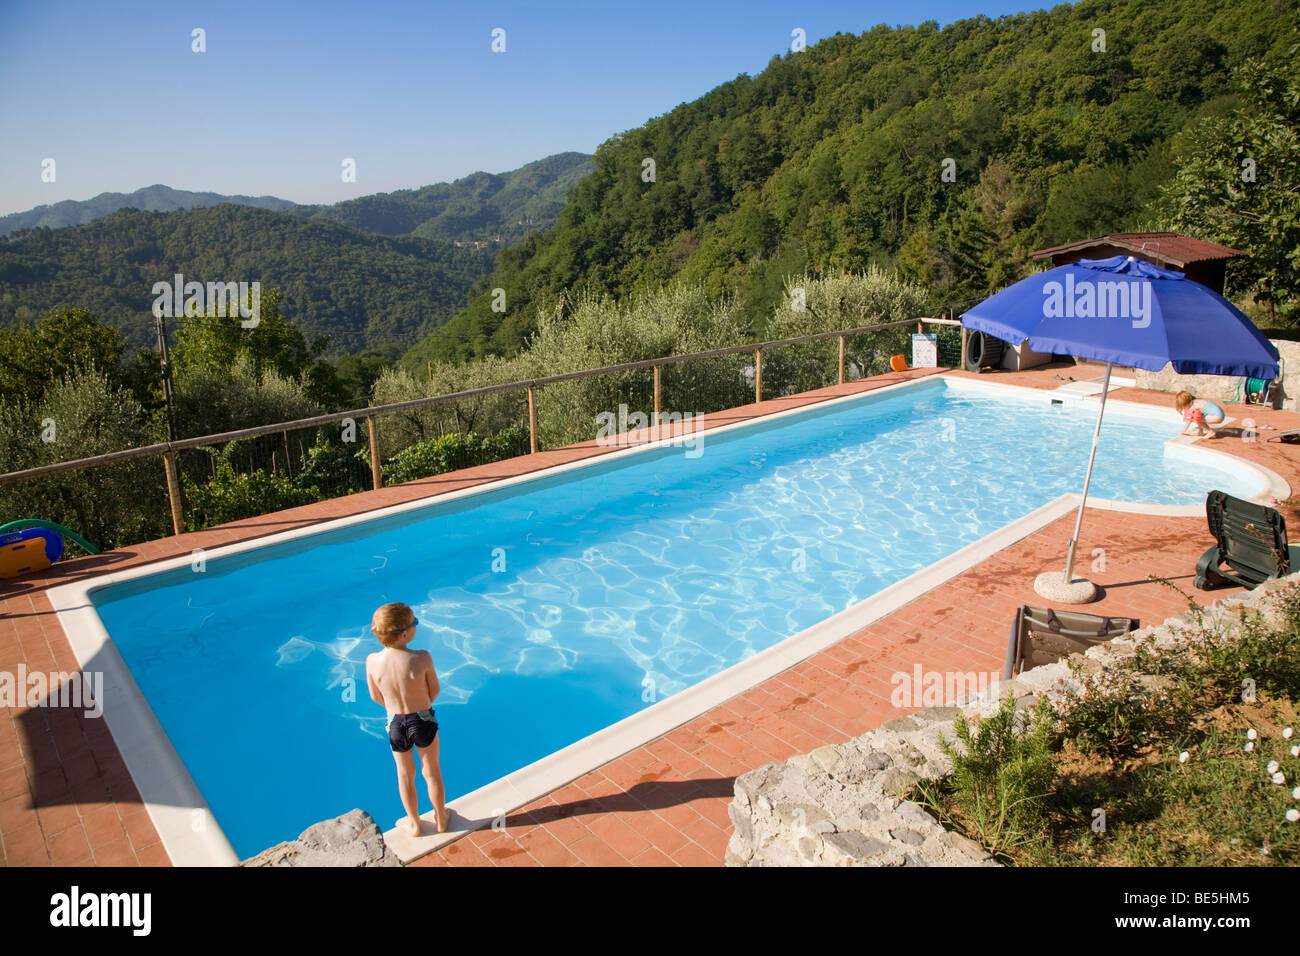 Swimming pool for holiday villas in Tuscany, Italy Stock Photo